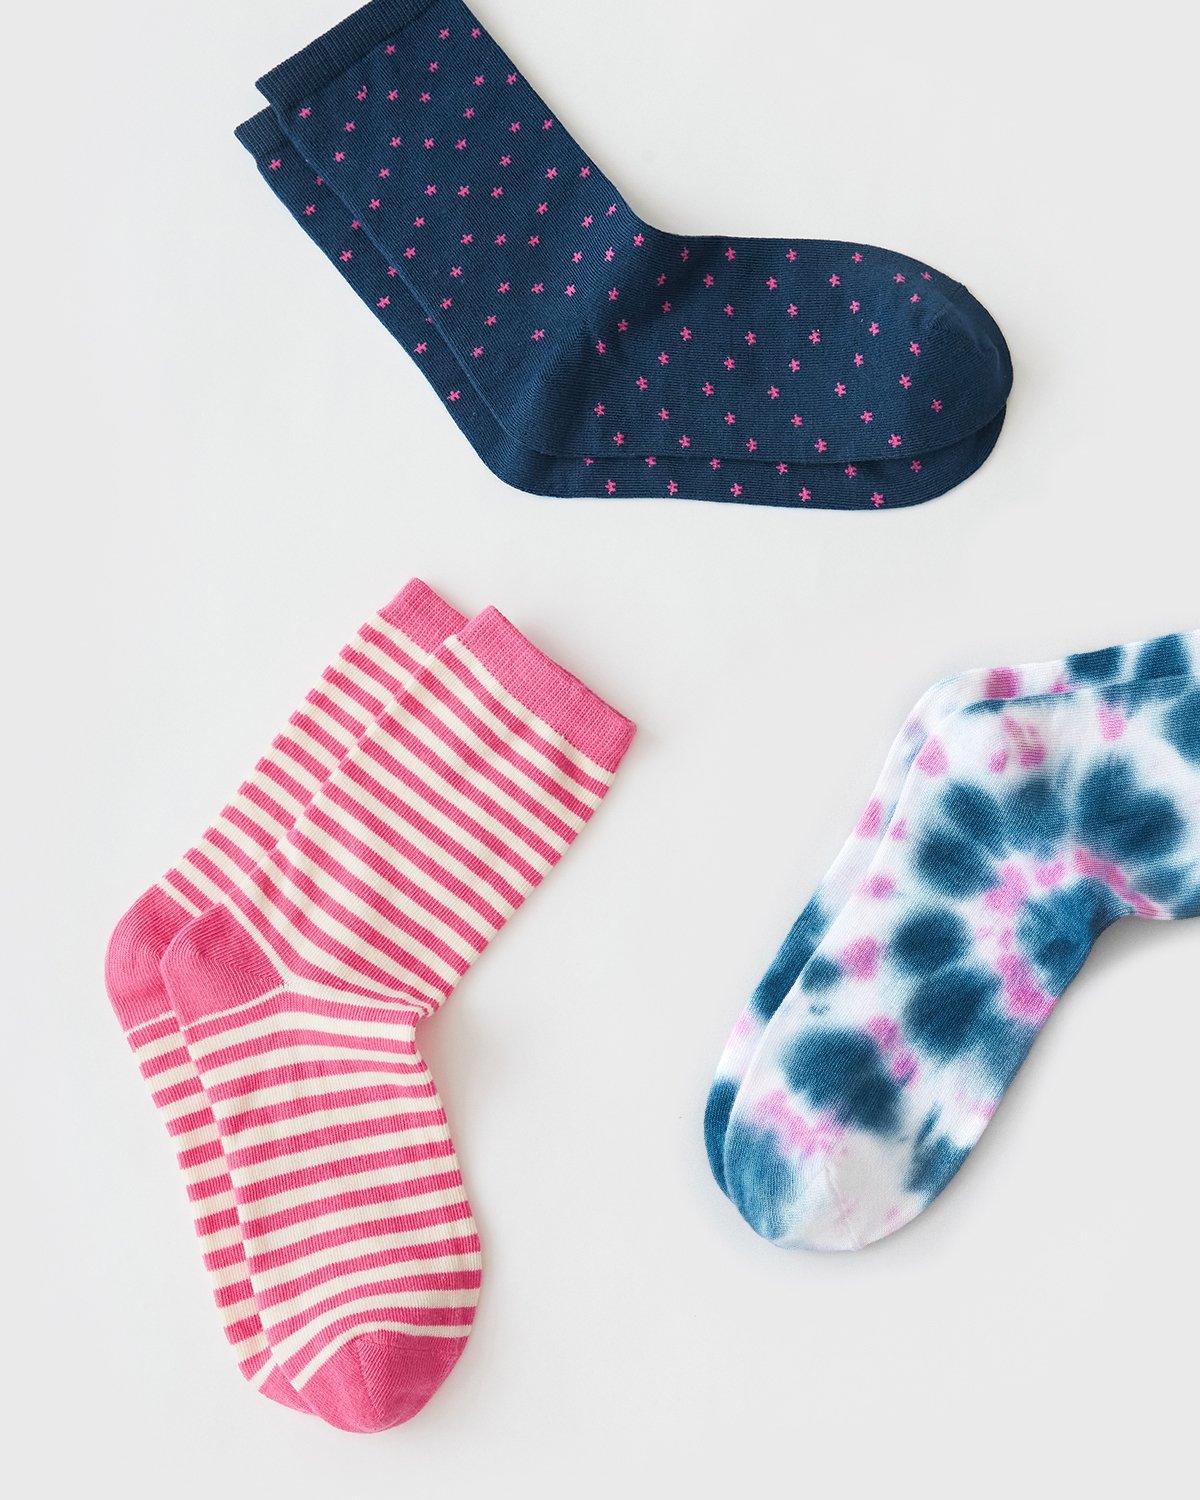 Biodegradable Socks 3 Pairs - Pink Punch | Sustainable TENCEL